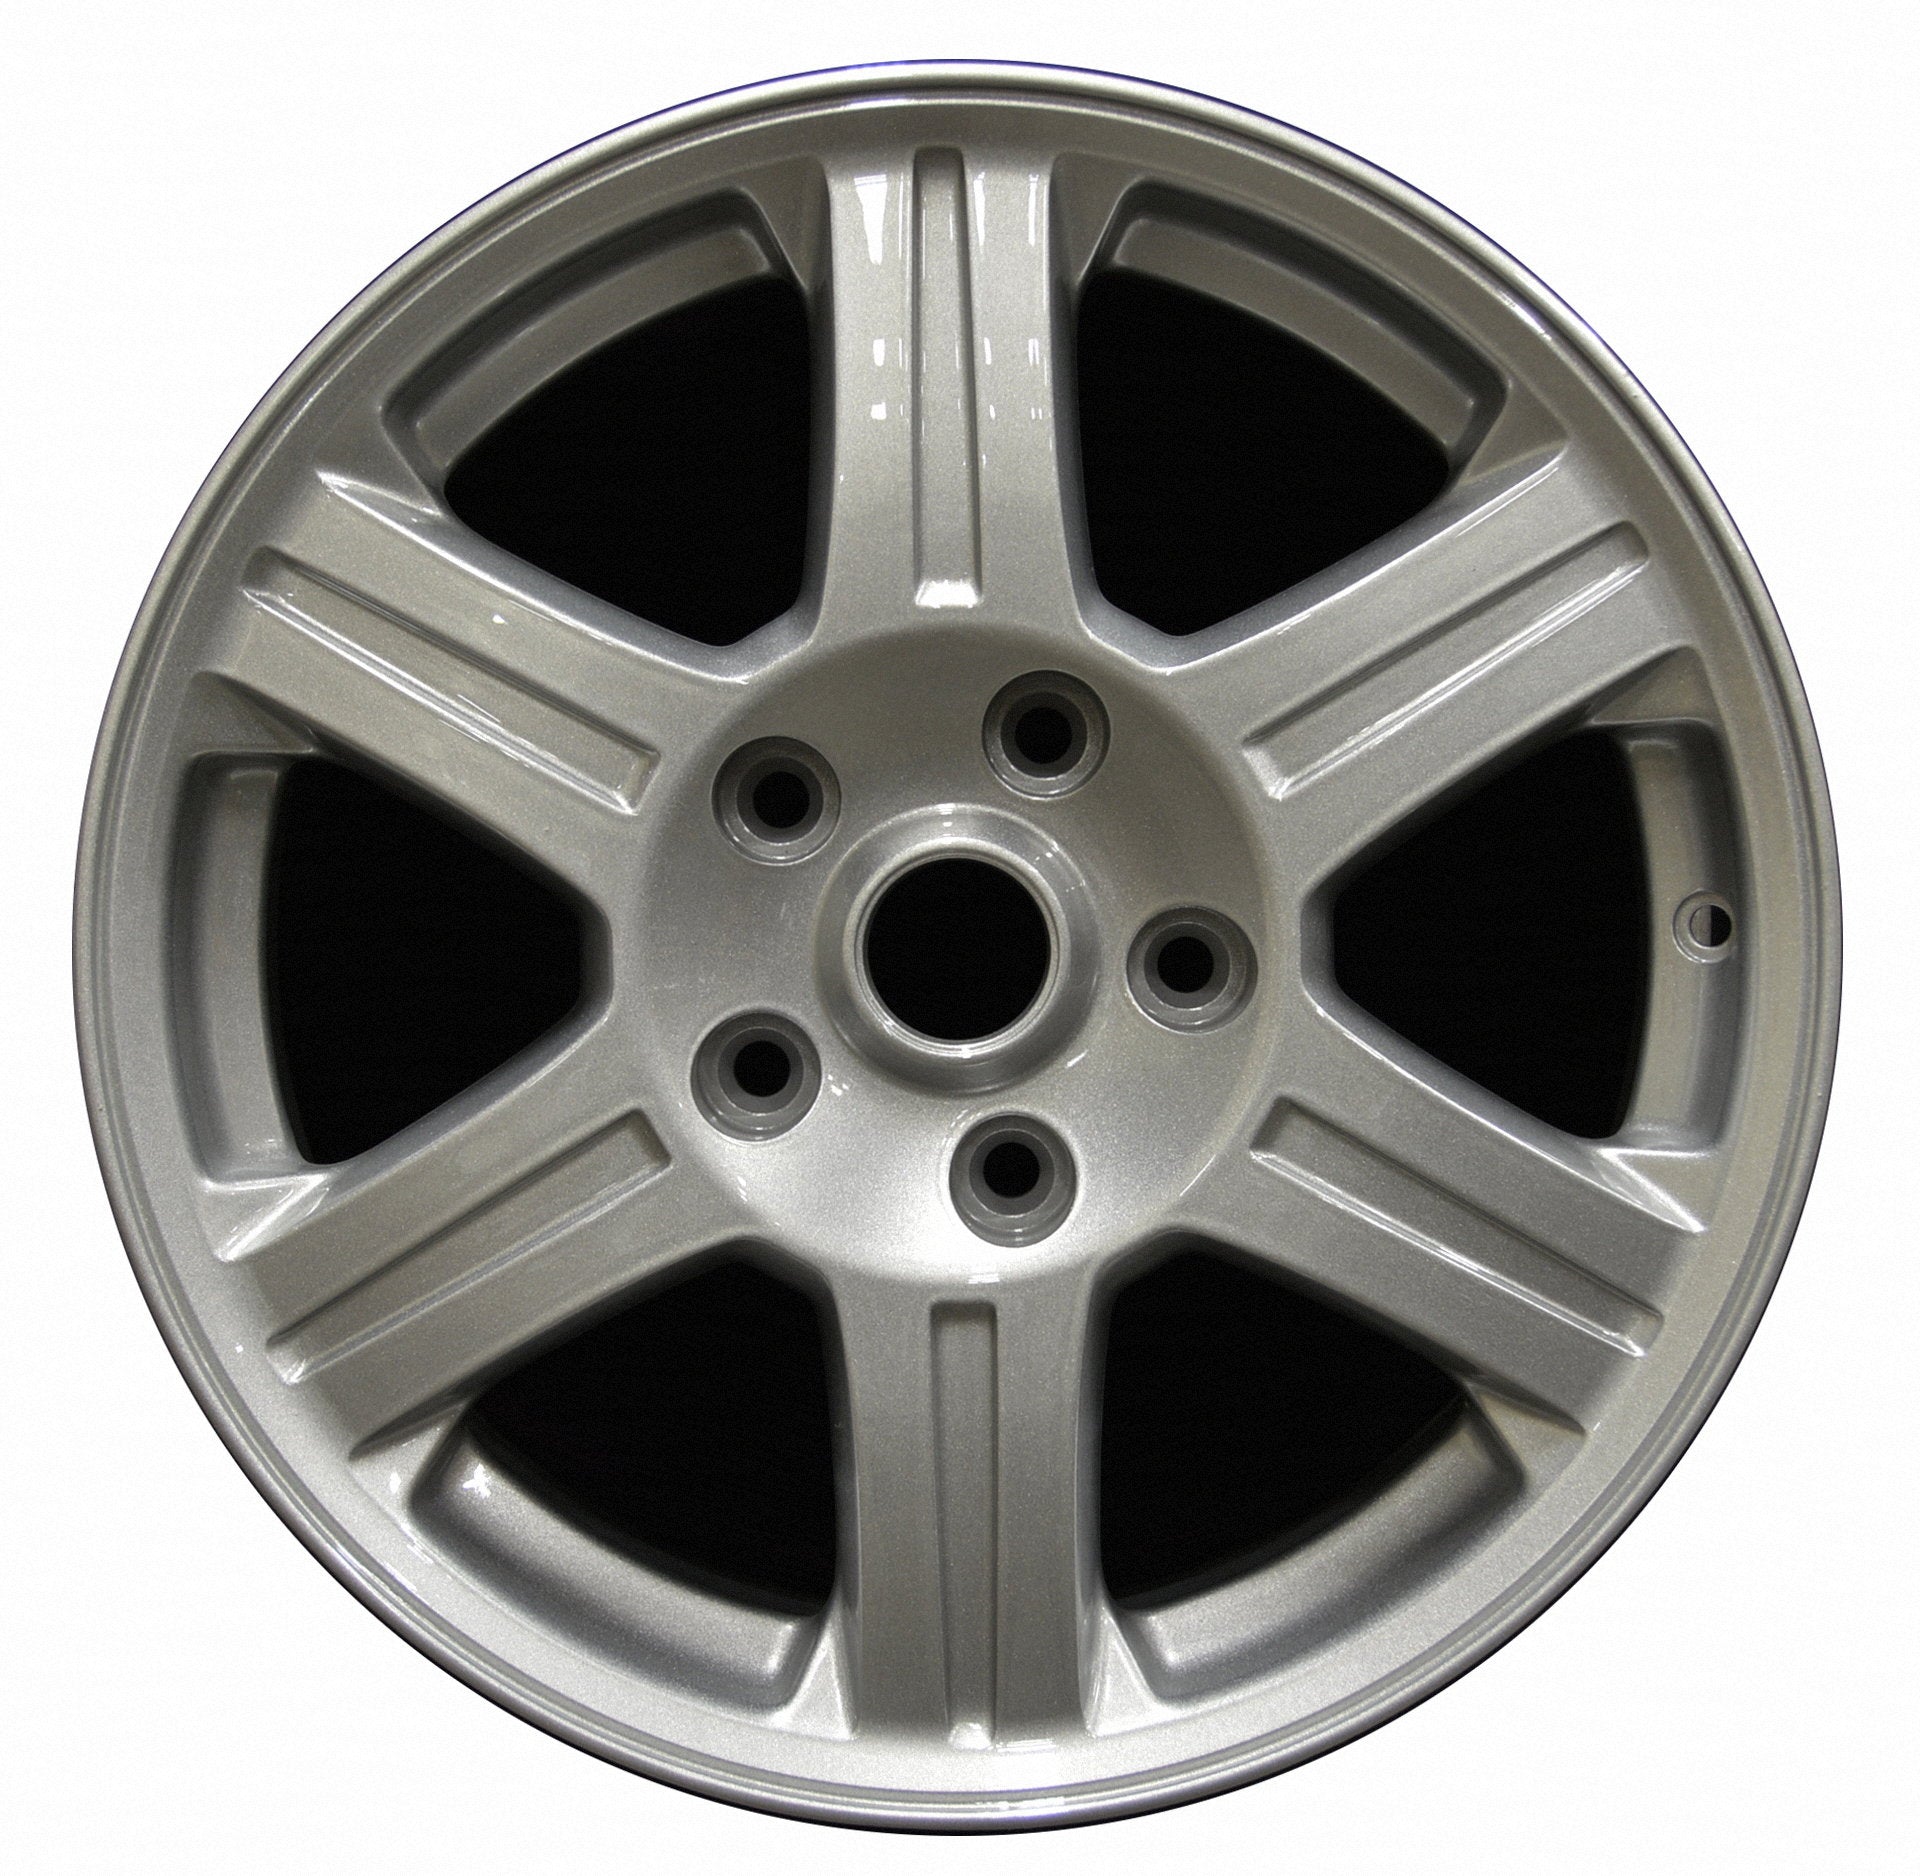 Chrysler Pacifica  2005, 2006, 2007, 2008 Factory OEM Car Wheel Size 17x7.5 Alloy WAO.2376.PS08.FF